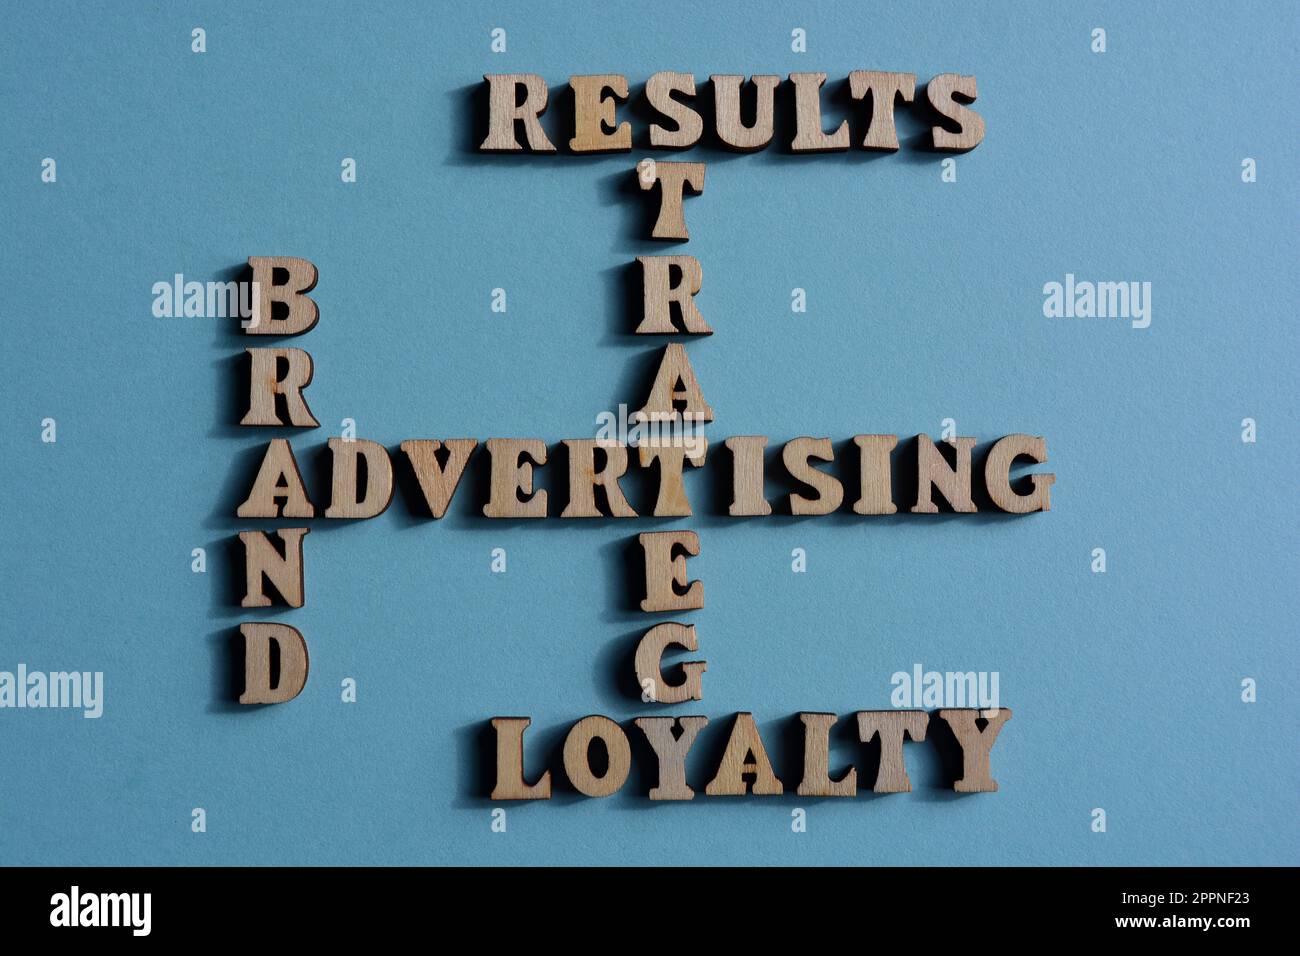 Advertising, Strategy, Results, Brand, Loyalty, words in wooden alphabet letters in crossword form isolated on blue background Stock Photo